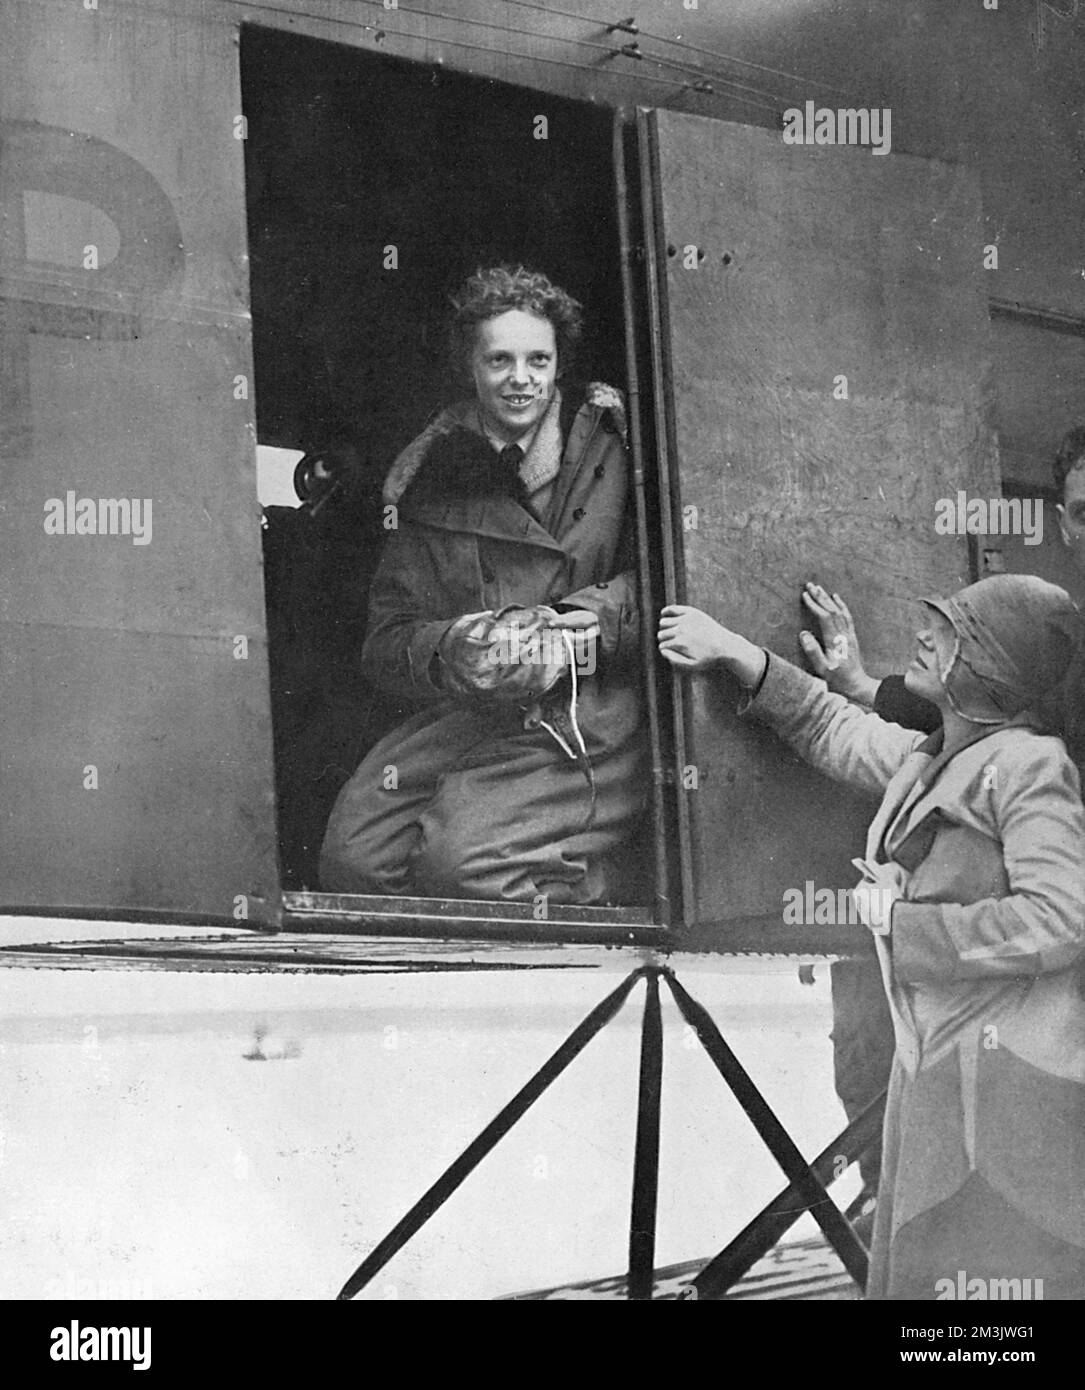 Amelia Earhart (1897 - 1937) moments after she had completed her trans-Atlantic flight in 1928. Although only a passenger, Earhart was the first woman to fly the Atlantic. Bothered by the fact that her pilots on this historic journey had been given no credit, she resolved to fly solo, finally achieving her goal in May 1932 when she flew from Newfoundland to Northern Ireland. Earhart's plane went missing during a round-the-world flight with her navigator, Frederick Noonan in 1937.  1928 Stock Photo